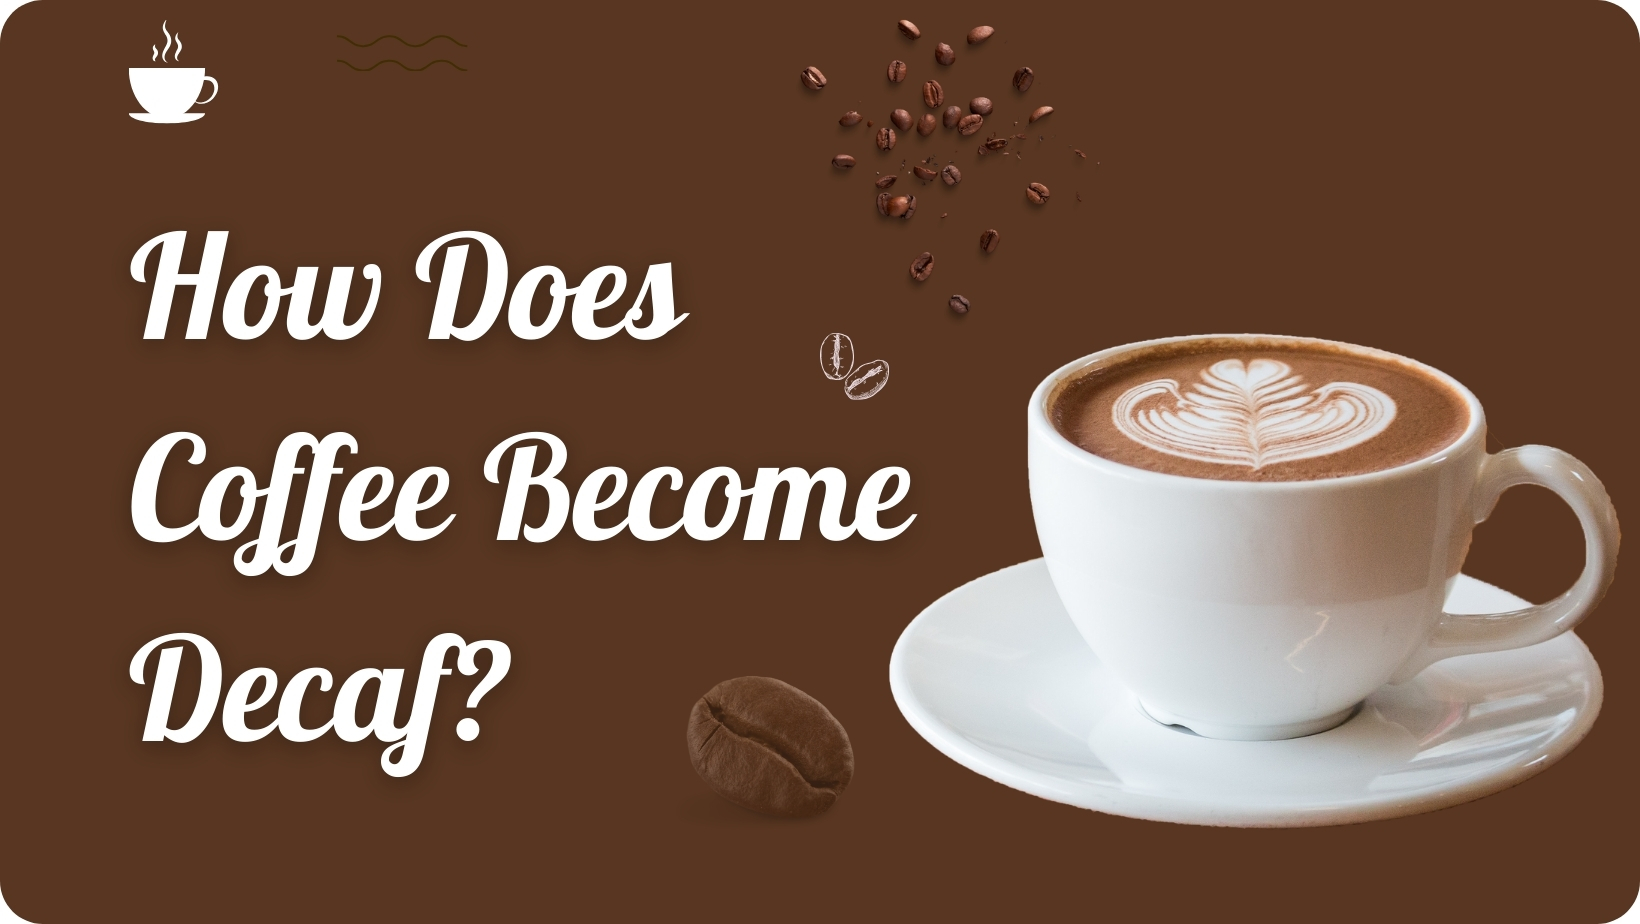 How Does Coffee Become Decaf?